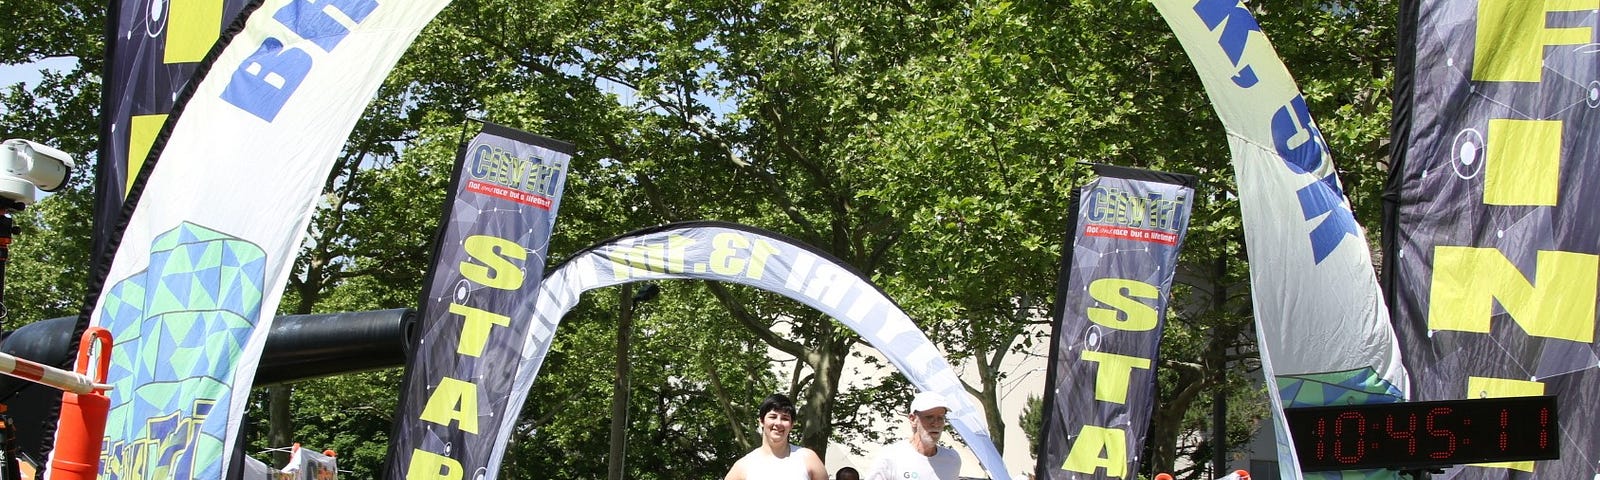 Neil and Nora Offen hit the finish line at the Memorial Day 5K.